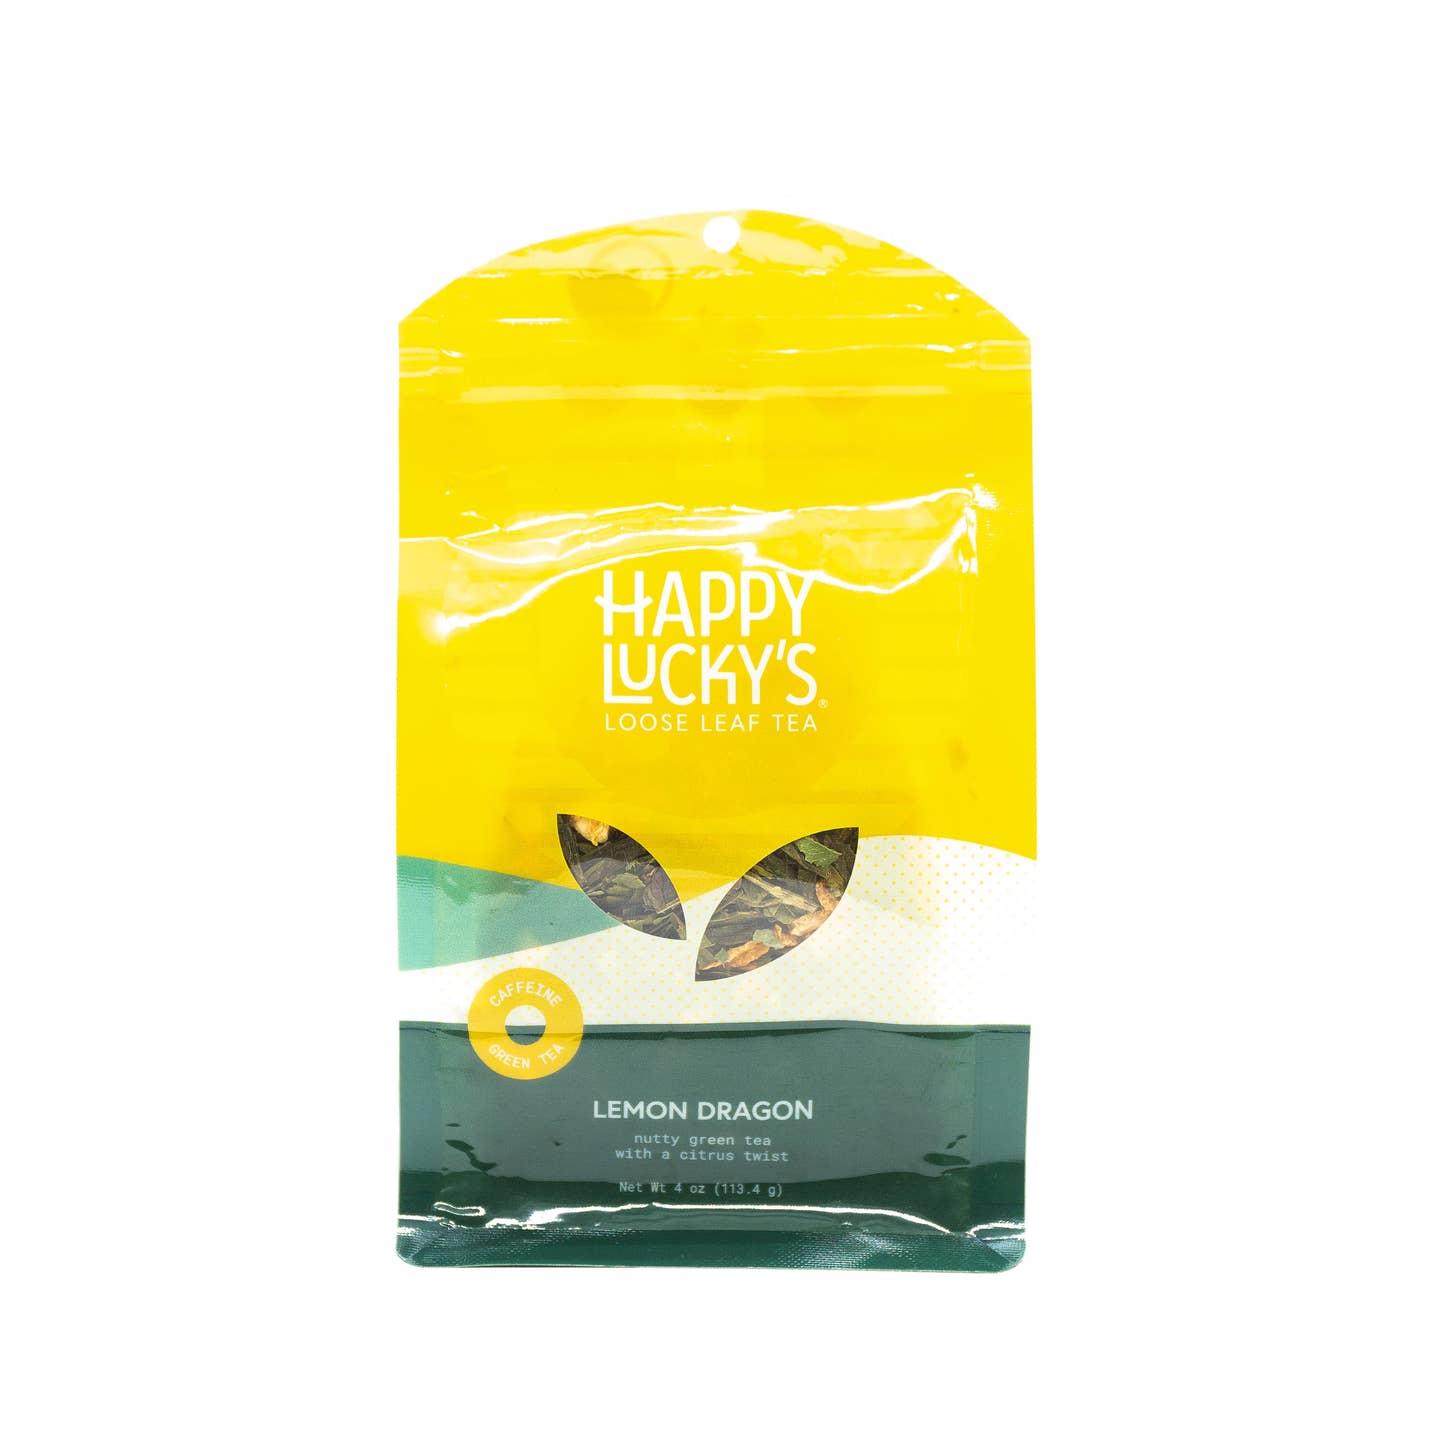 Shop Lemon Dragon by Happy Lucky's at Sips by